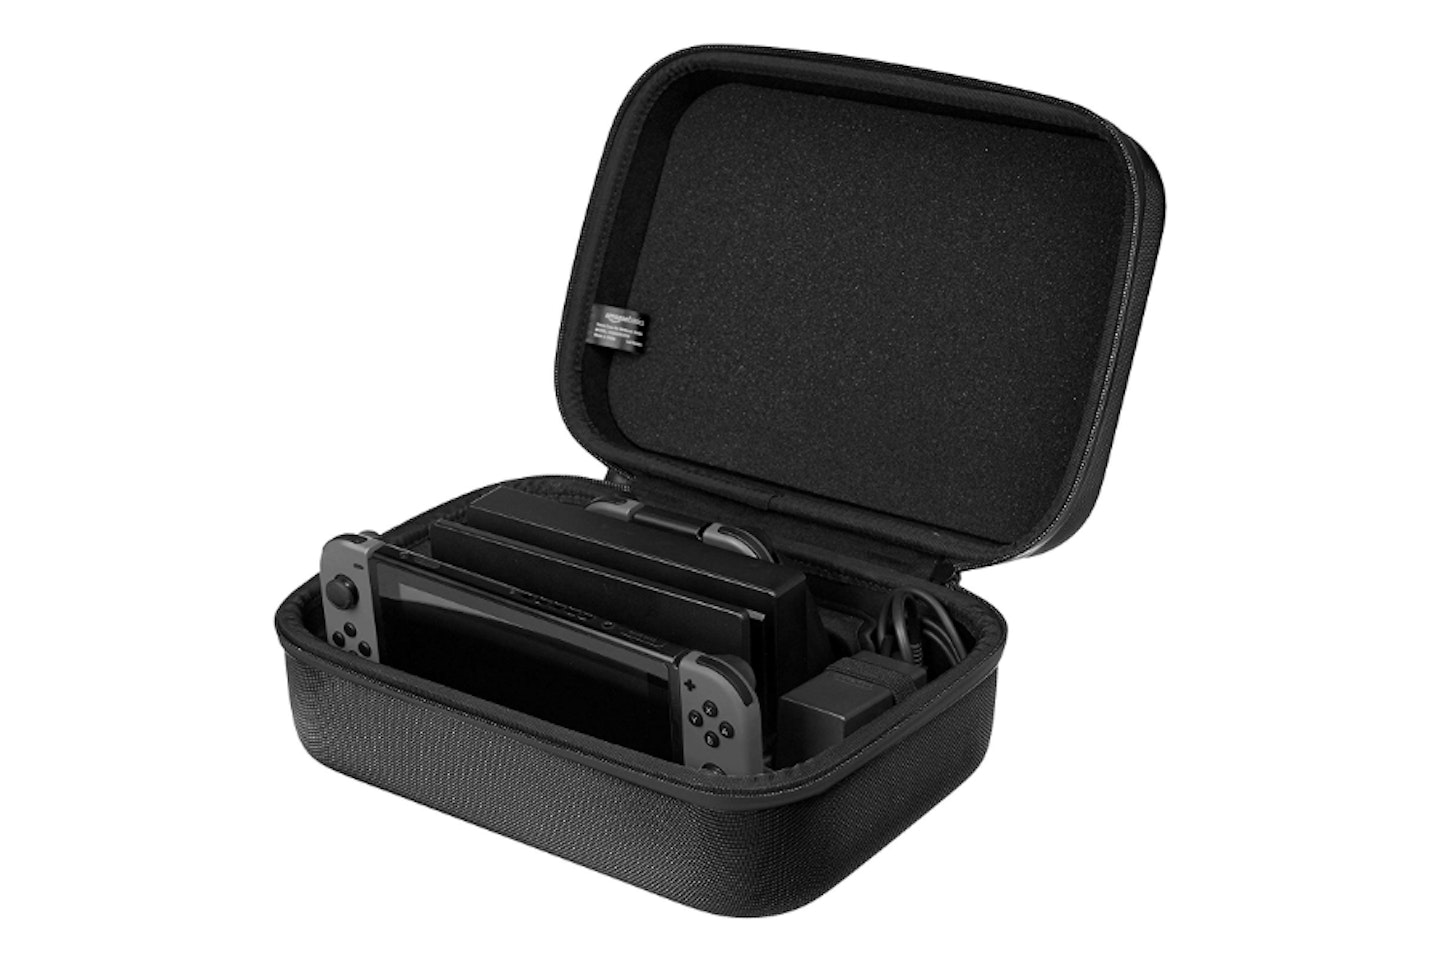 Travel and Storage Case for Nintendo Switch – Black, WAS £16.99 NOW £12.74